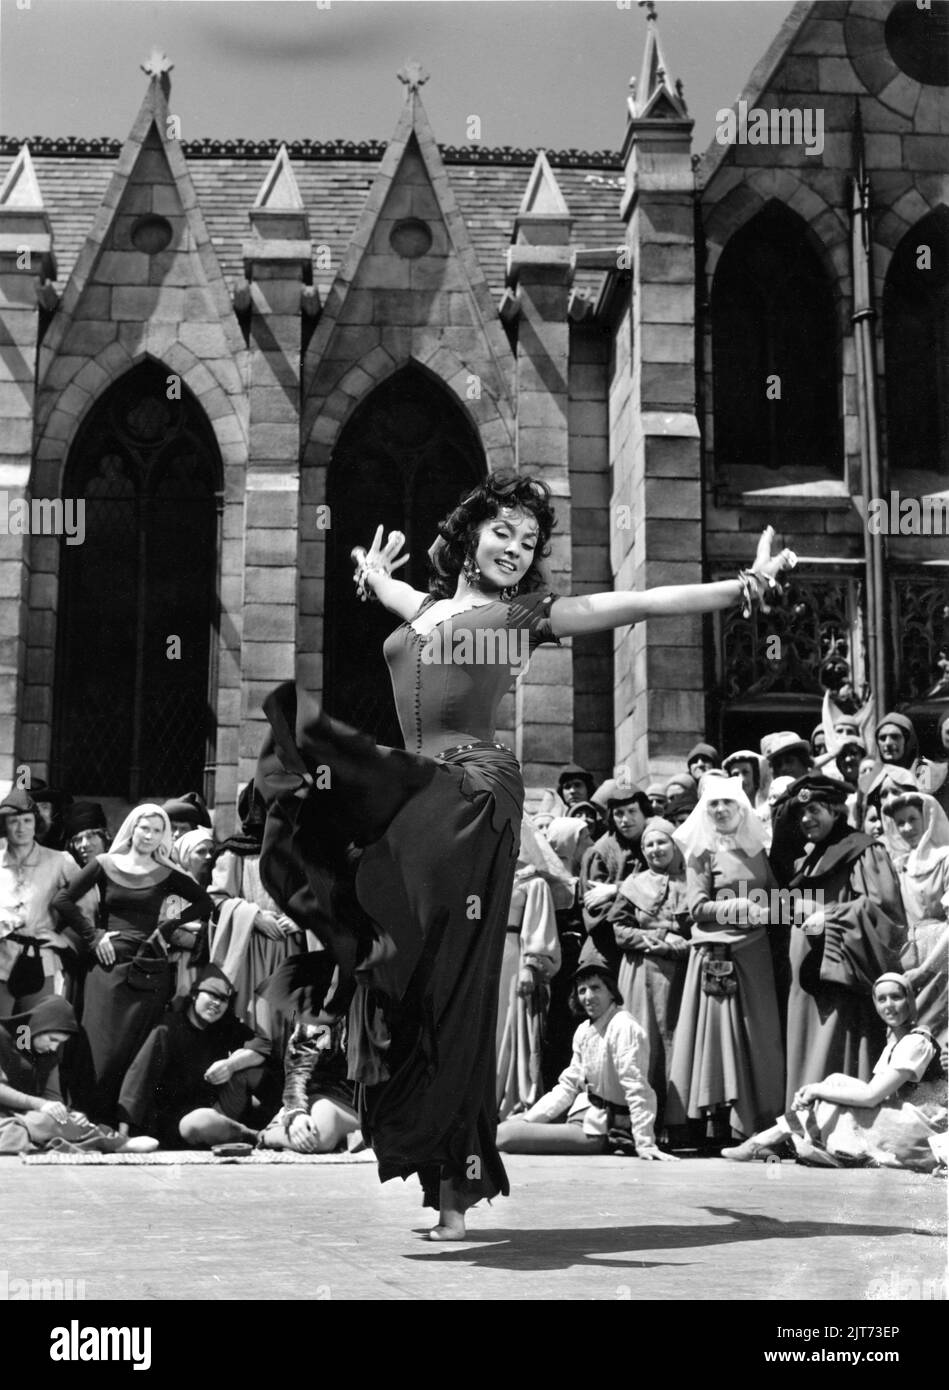 GINA LOLLOBRIGIDA as Esmeralda dancing in THE HUNCHBACK OF NOTRE DAME / NOTRE DAME DE PARIS 1956 director JEAN DELANNOY novel Victor Hugo adaptation / dialogue Jean Aurenche and Jacques Prevert music Georges Auric costume design Georges Benda production design Rene Renoux choreographer Leonid Massine producers Raymond and Robert Hakim France - Italy co-production Paris Film Productions / Panitalia Stock Photo